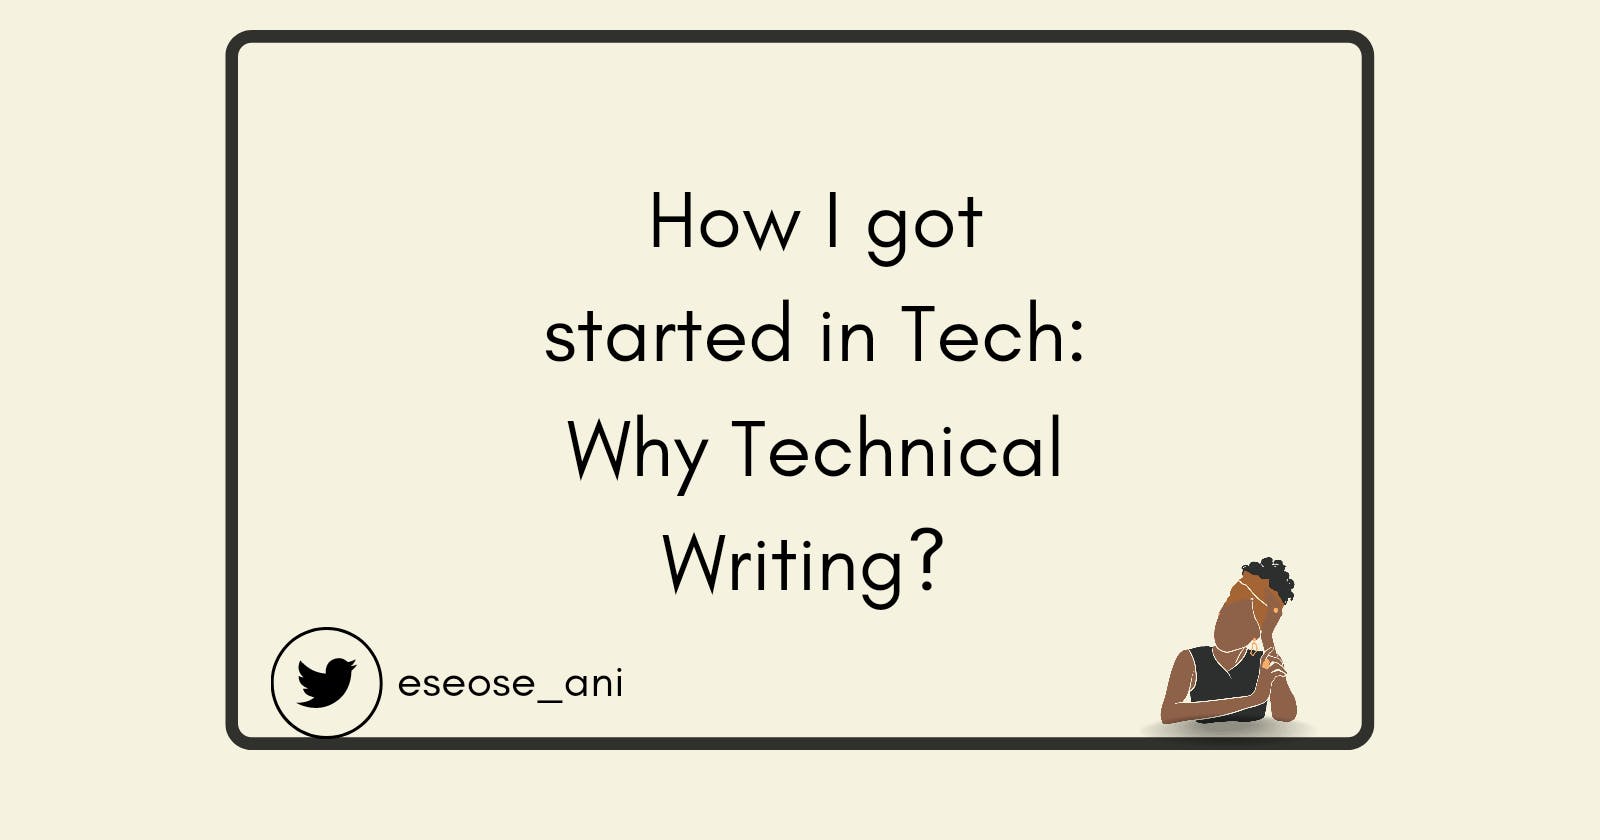 How I got started in Tech: Why Technical Writing?